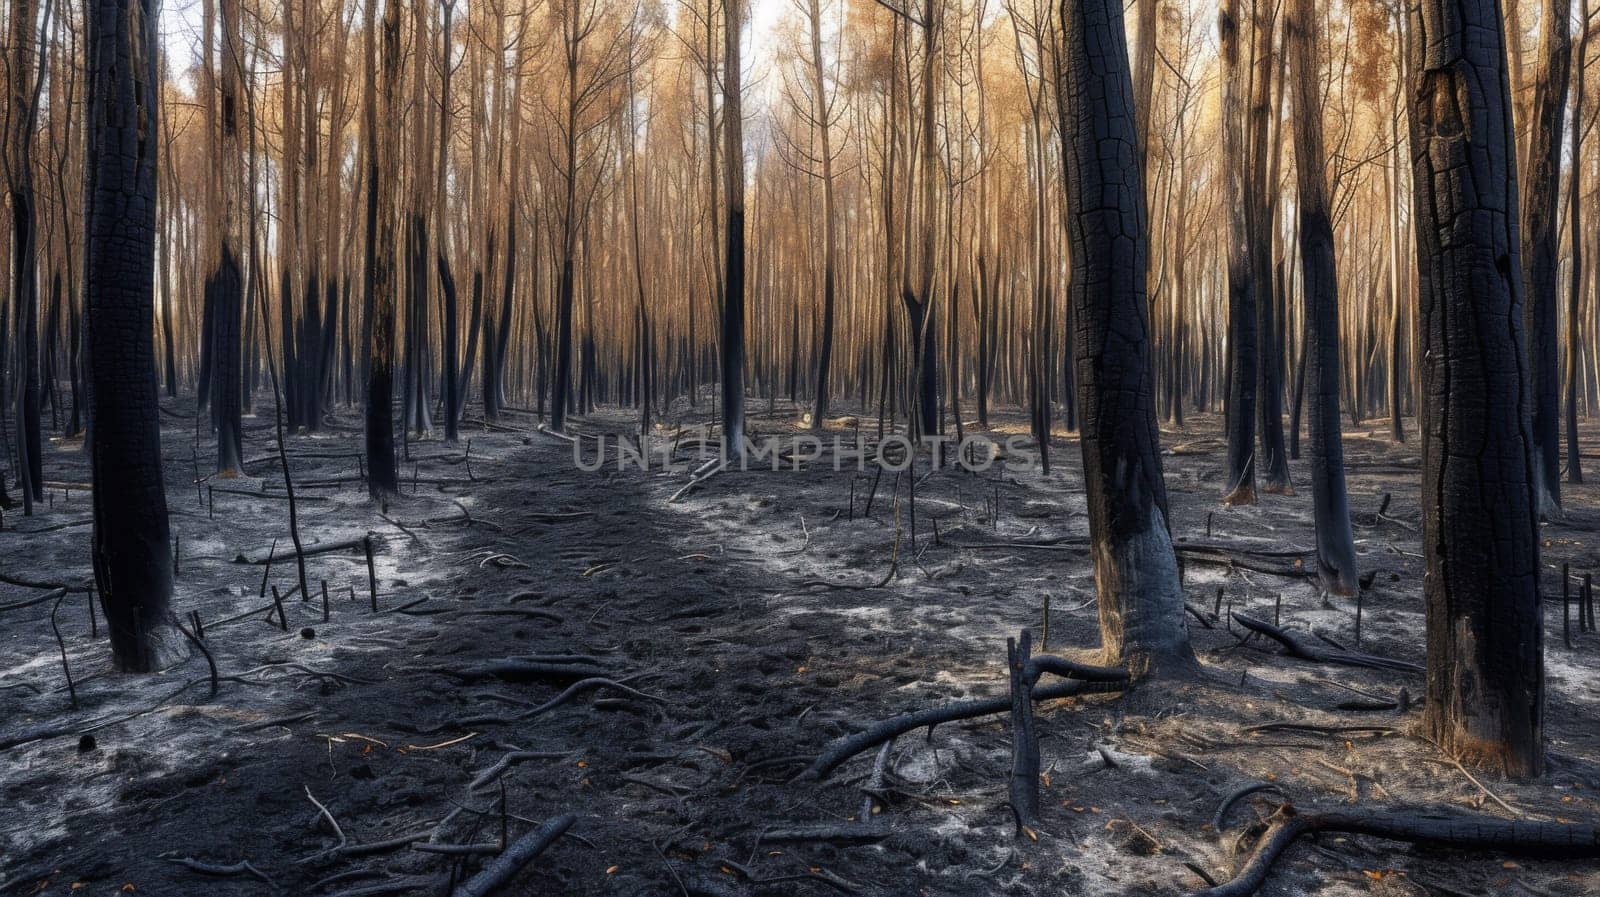 A forest with trees that have been burned and are bare